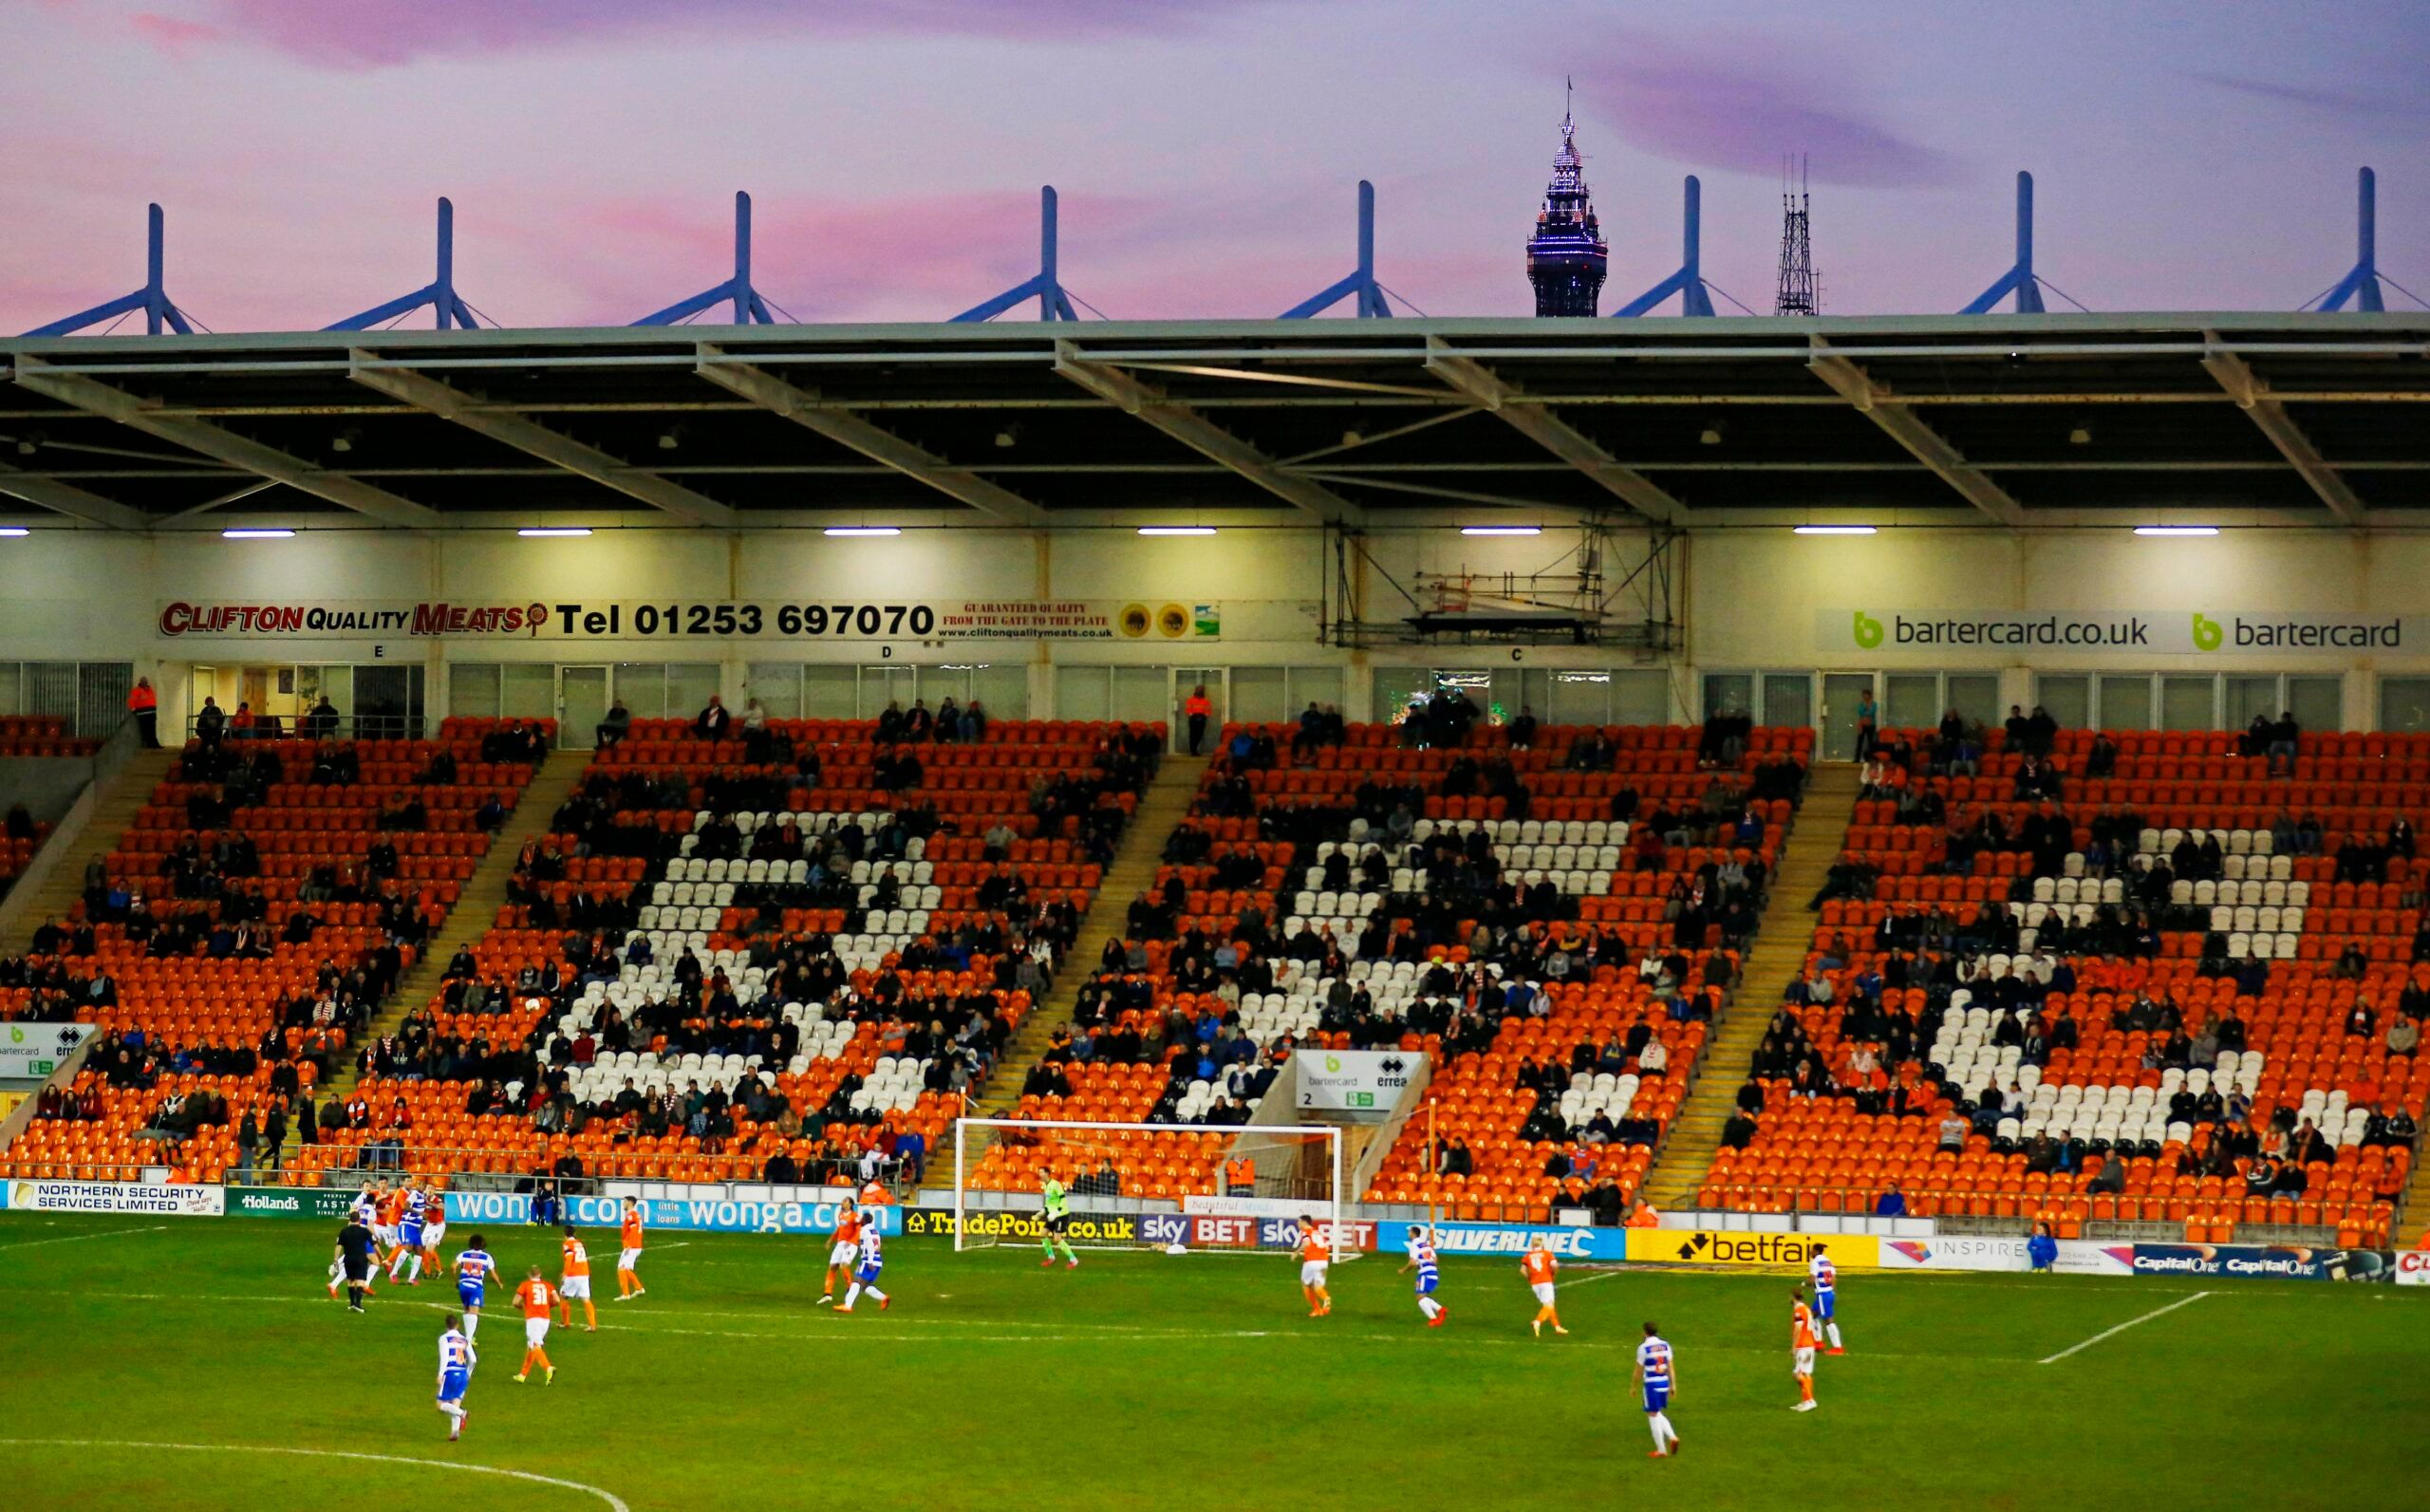 Football - Blackpool v Reading - Sky Bet Football League Championship - Bloomfield Road - 7/4/15 
General view of empty seats at Bloomfield Road 
Mandatory Credit: Action Images / Carl Recine 
Livepic 
EDITORIAL USE ONLY. No use with unauthorized audio, video, data, fixture lists, club/league logos or 